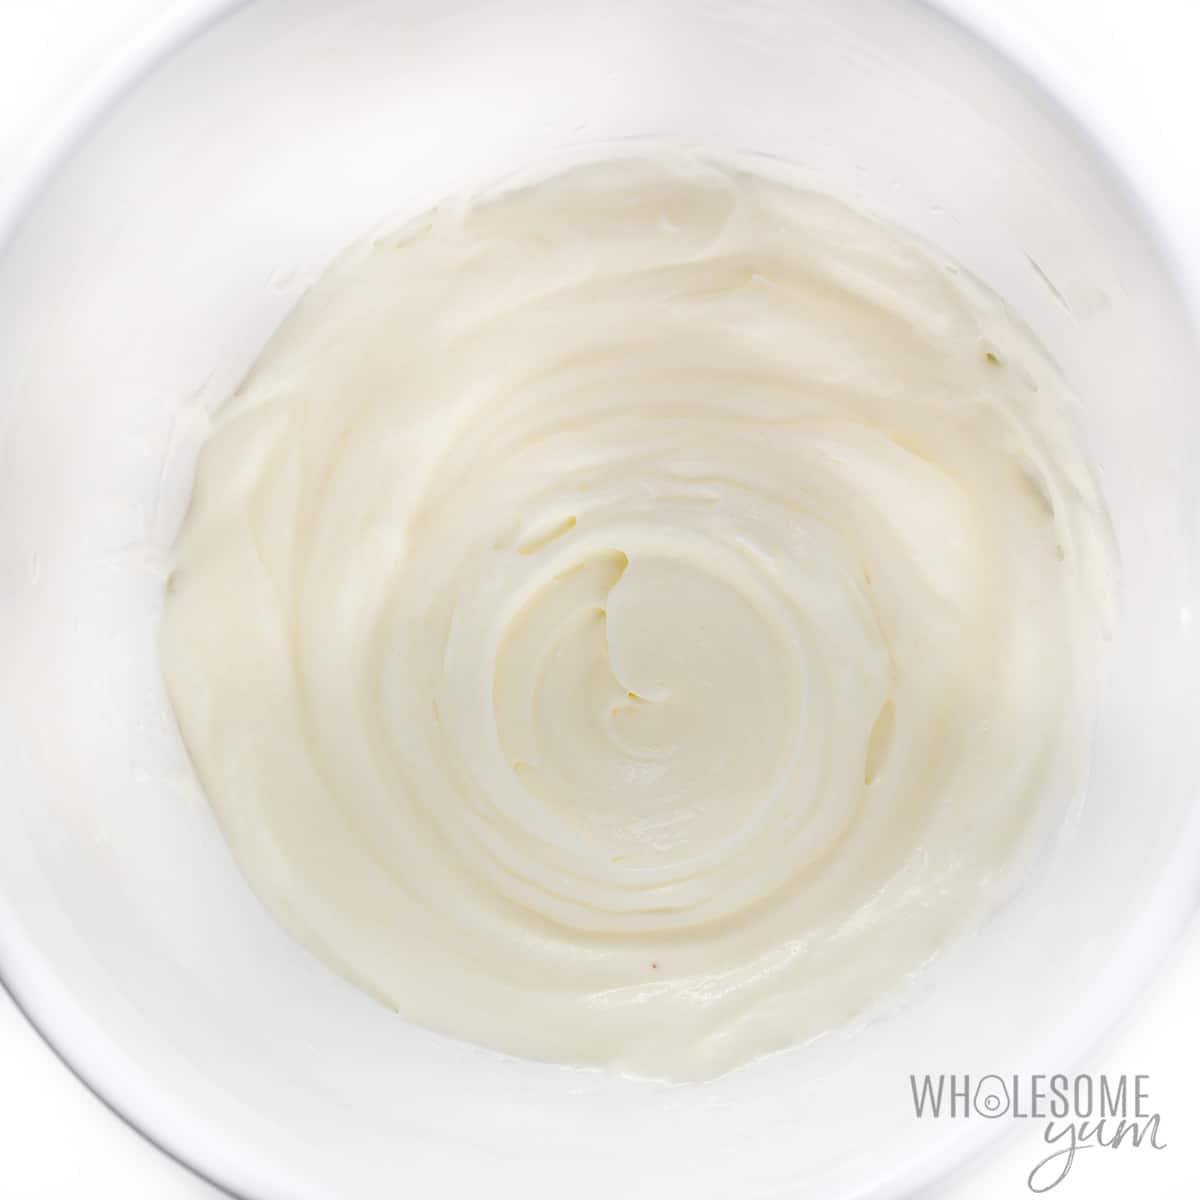 Heavy cream whipped to soft peaks.